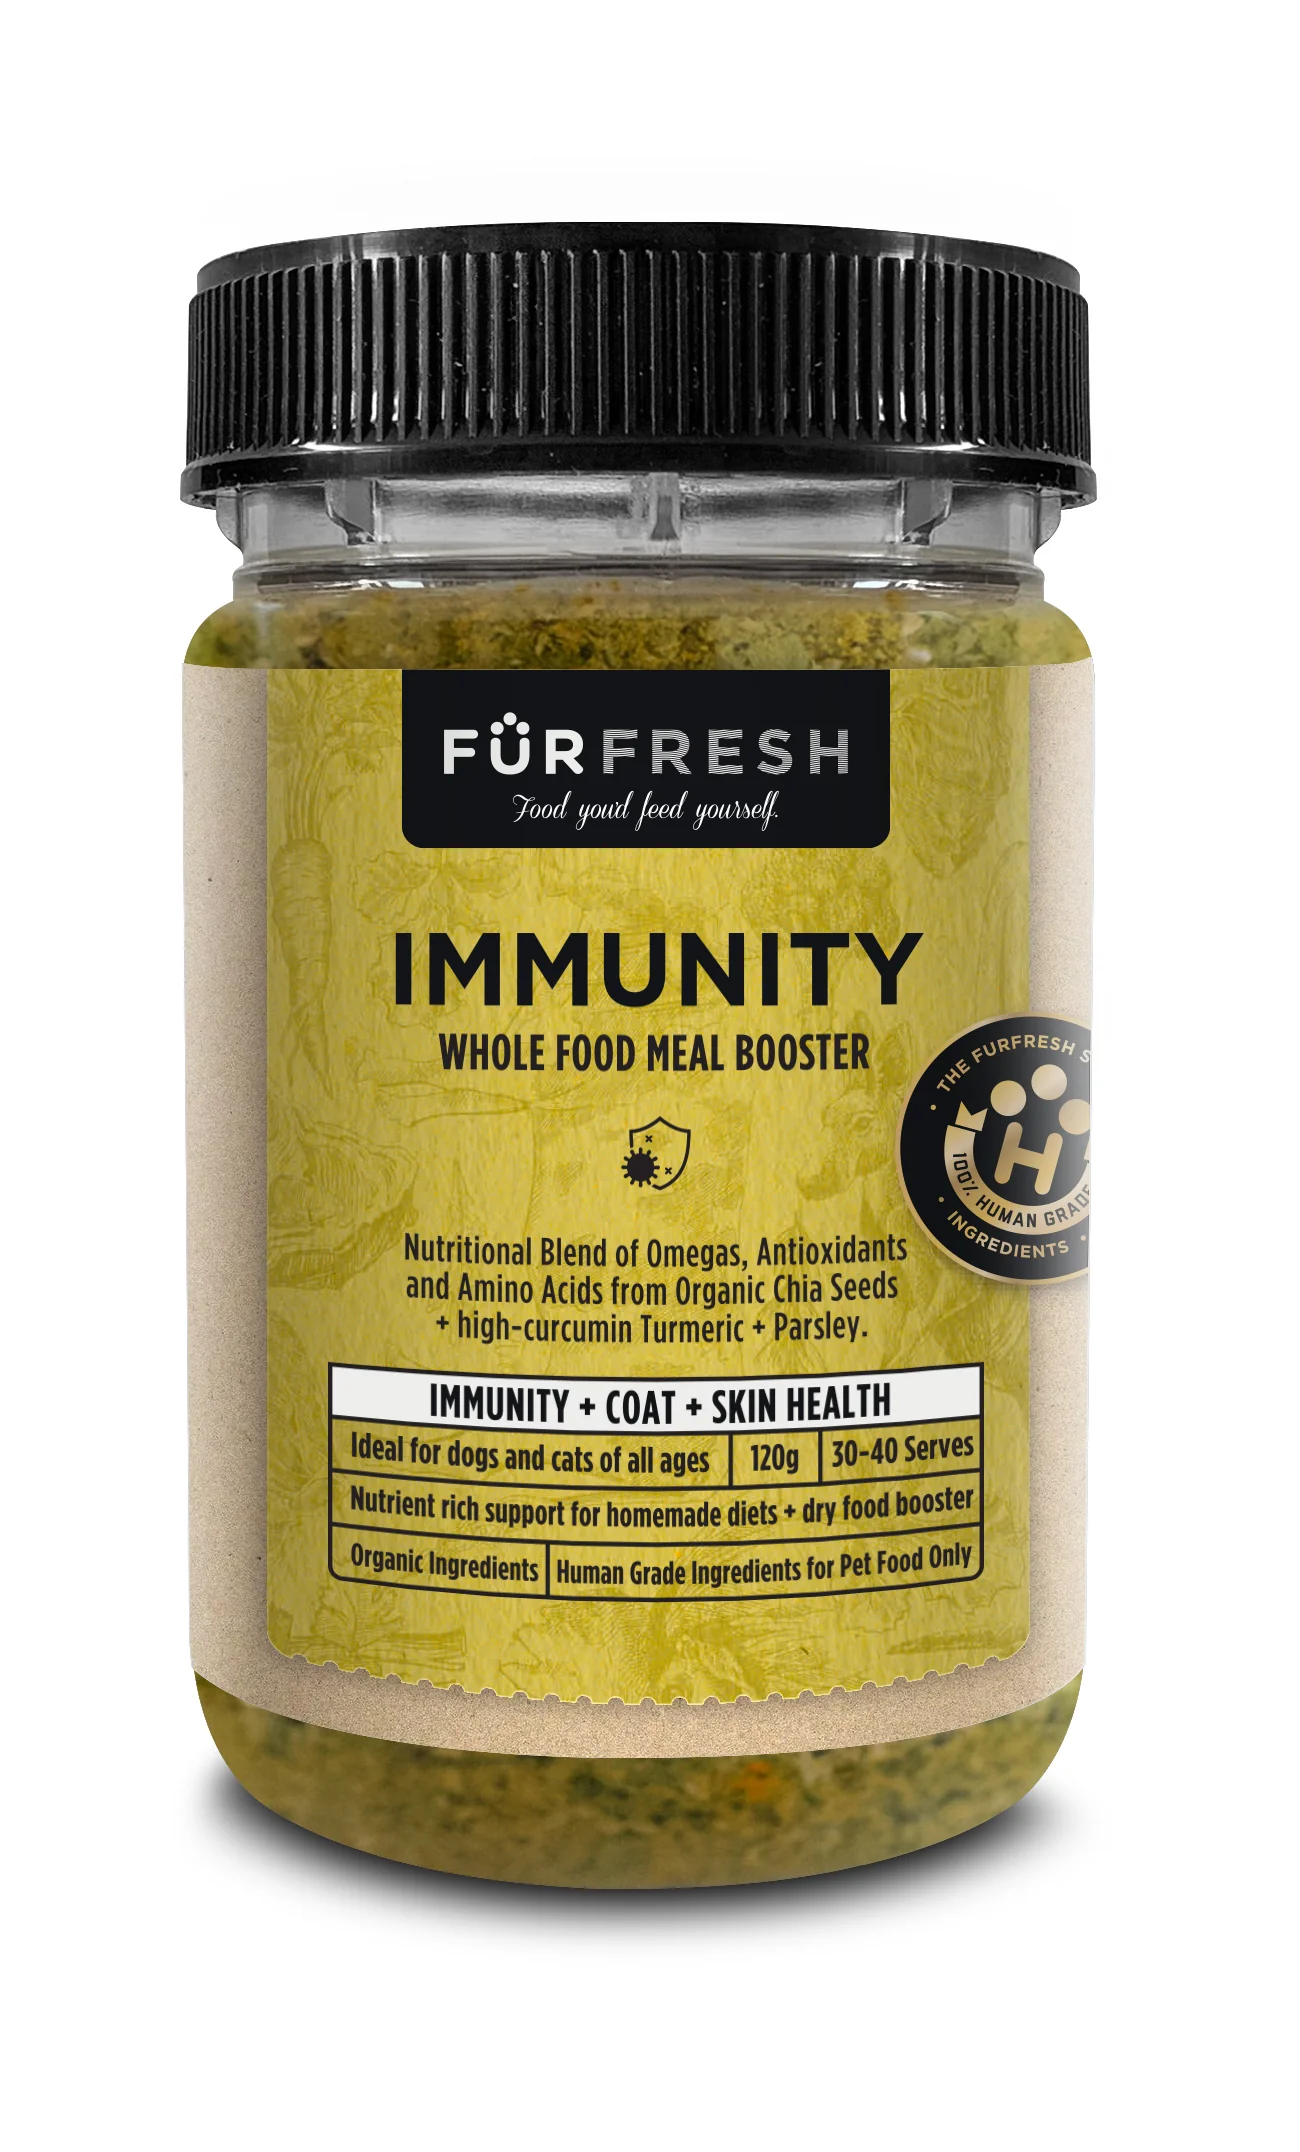 FurFresh Immunity - Whole Food Meal Booster